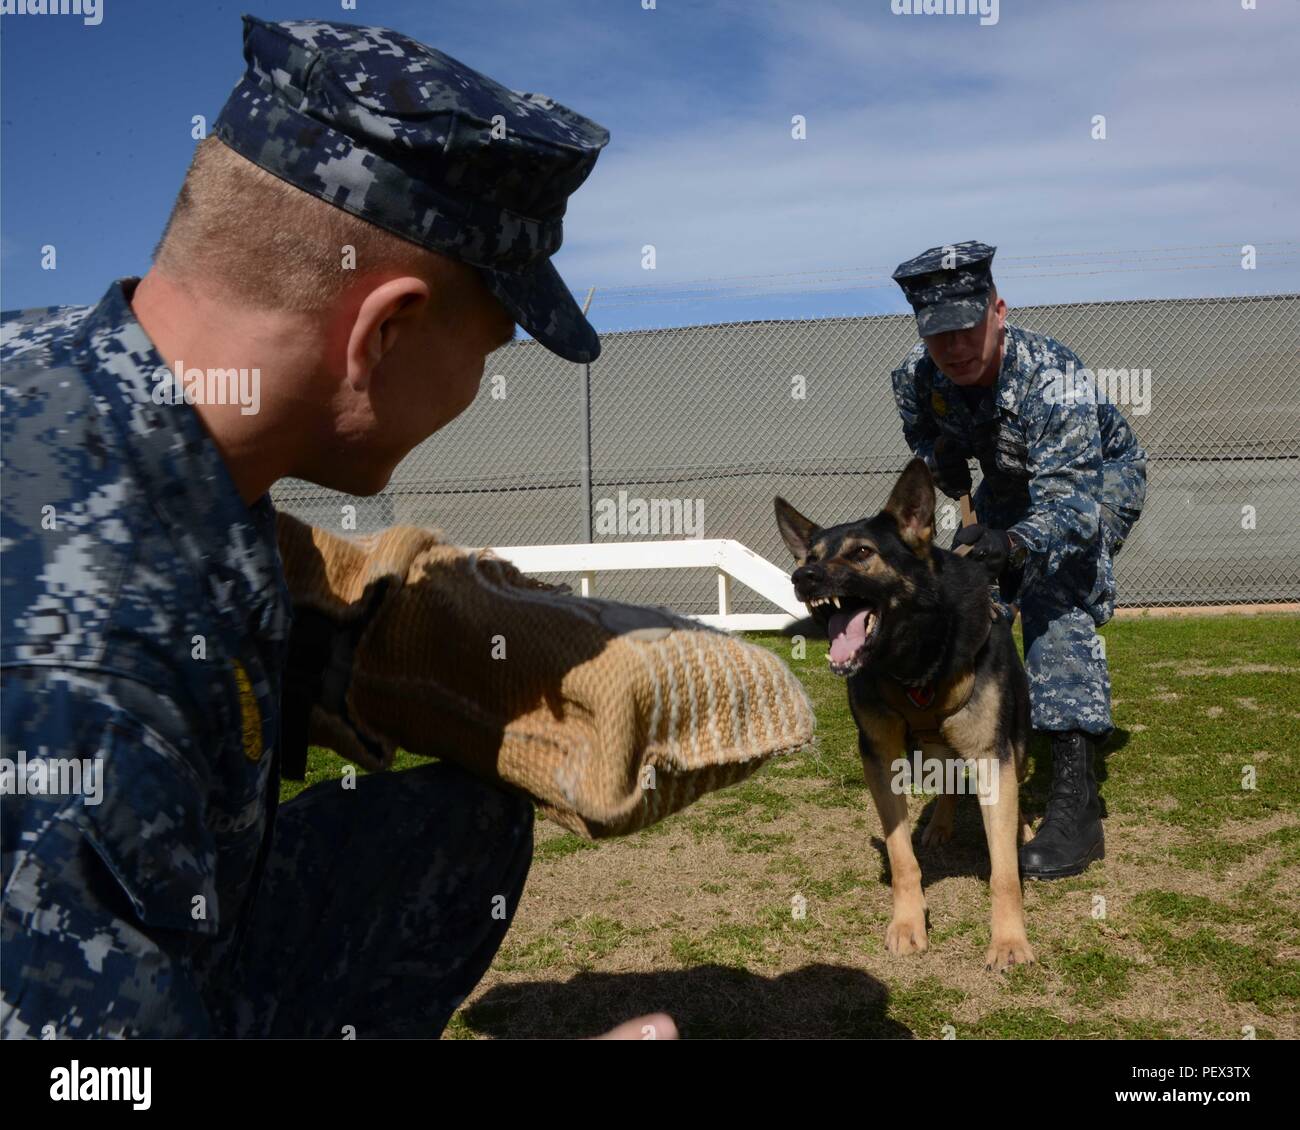 160212-N-IL474-494 SOUDA BAY, Greece (Feb. 12, 2016) Master-at-Arms 1st  Class Michael Langehennig, right, and Master-at-Arms 3rd Class Matthew  Hollingsworth perform controlled aggression training with military working  dog (MWD) Gerry on Naval Support